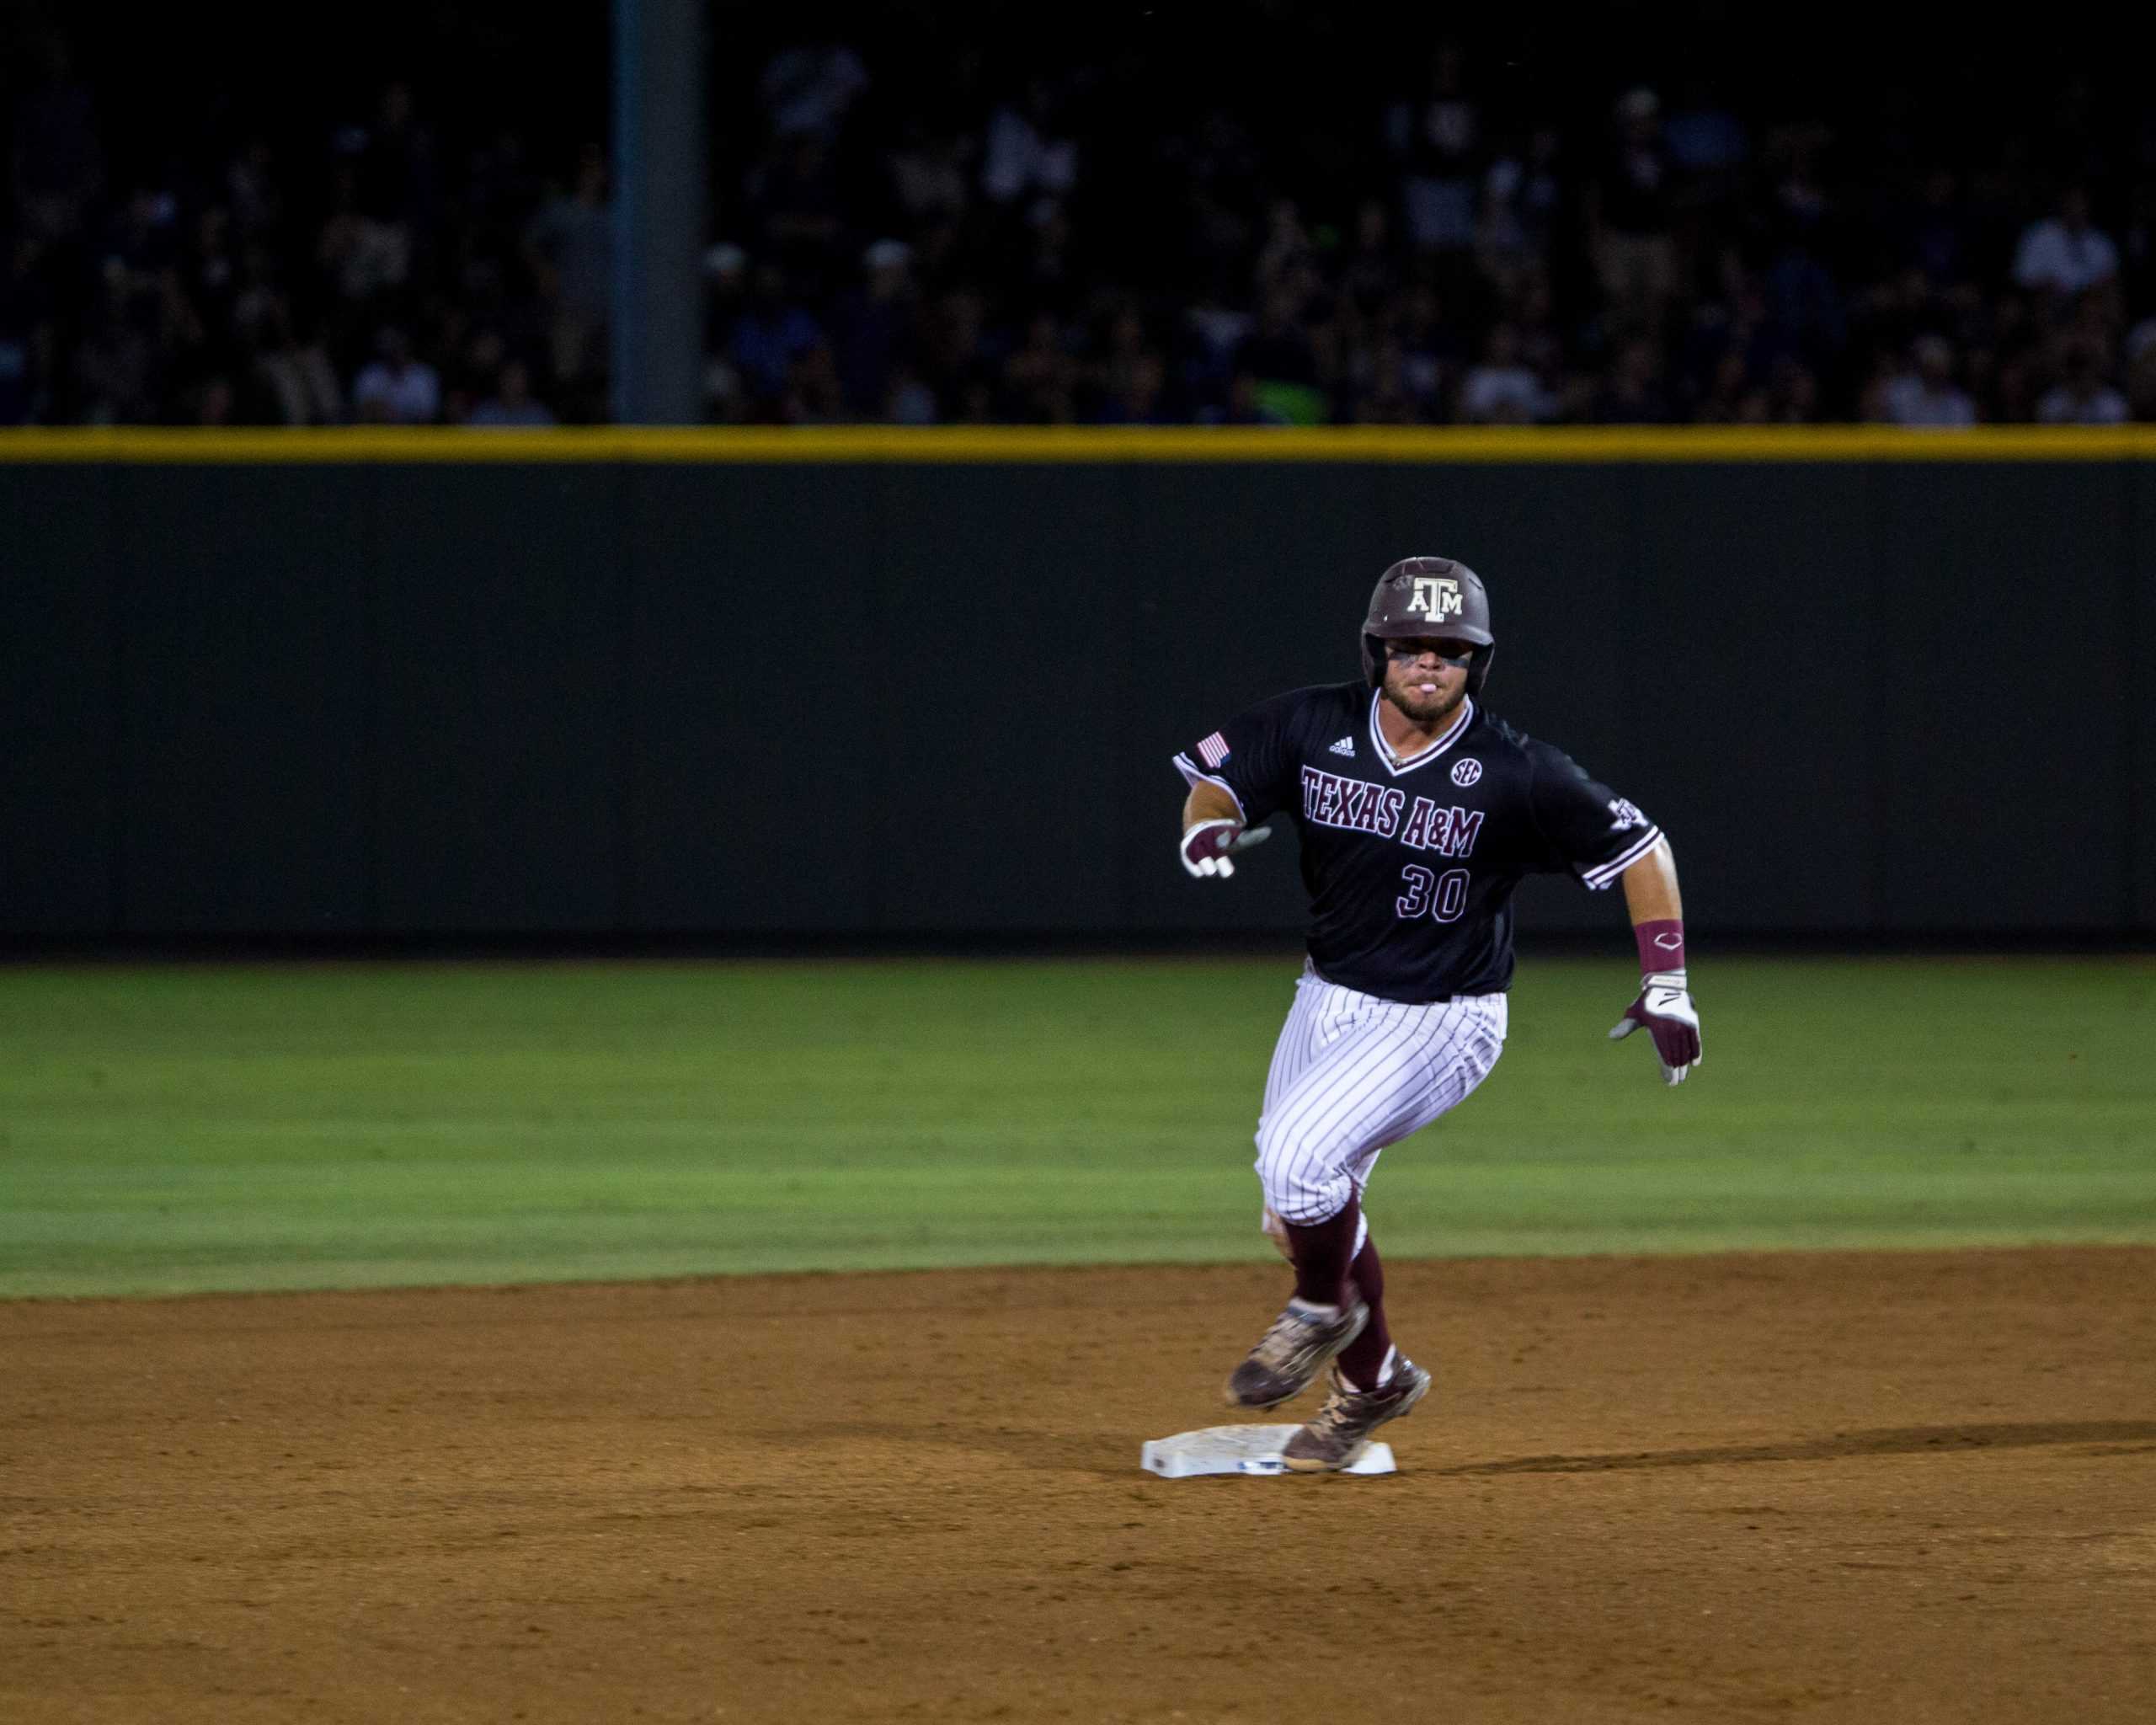 Ags+fall+5-4+to+Frogs+in+16+innings%2C+end+season+win+shy+of+Omaha